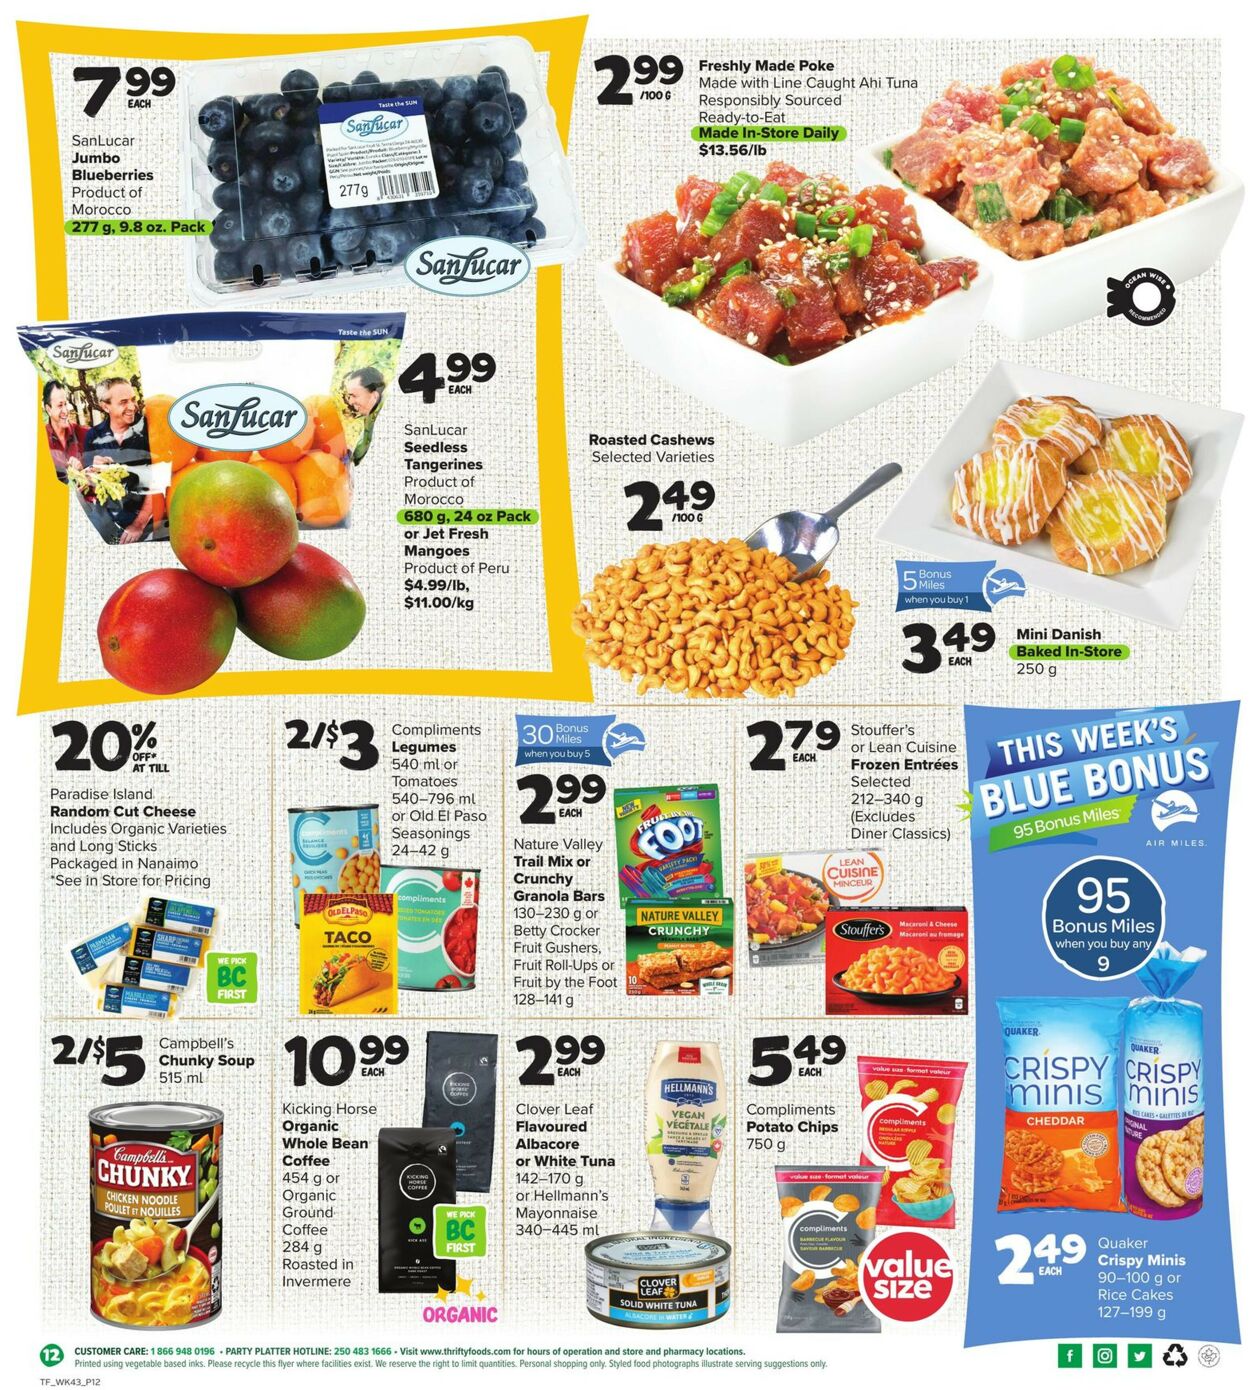 Thrifty Foods Flyer from 02/23/2023